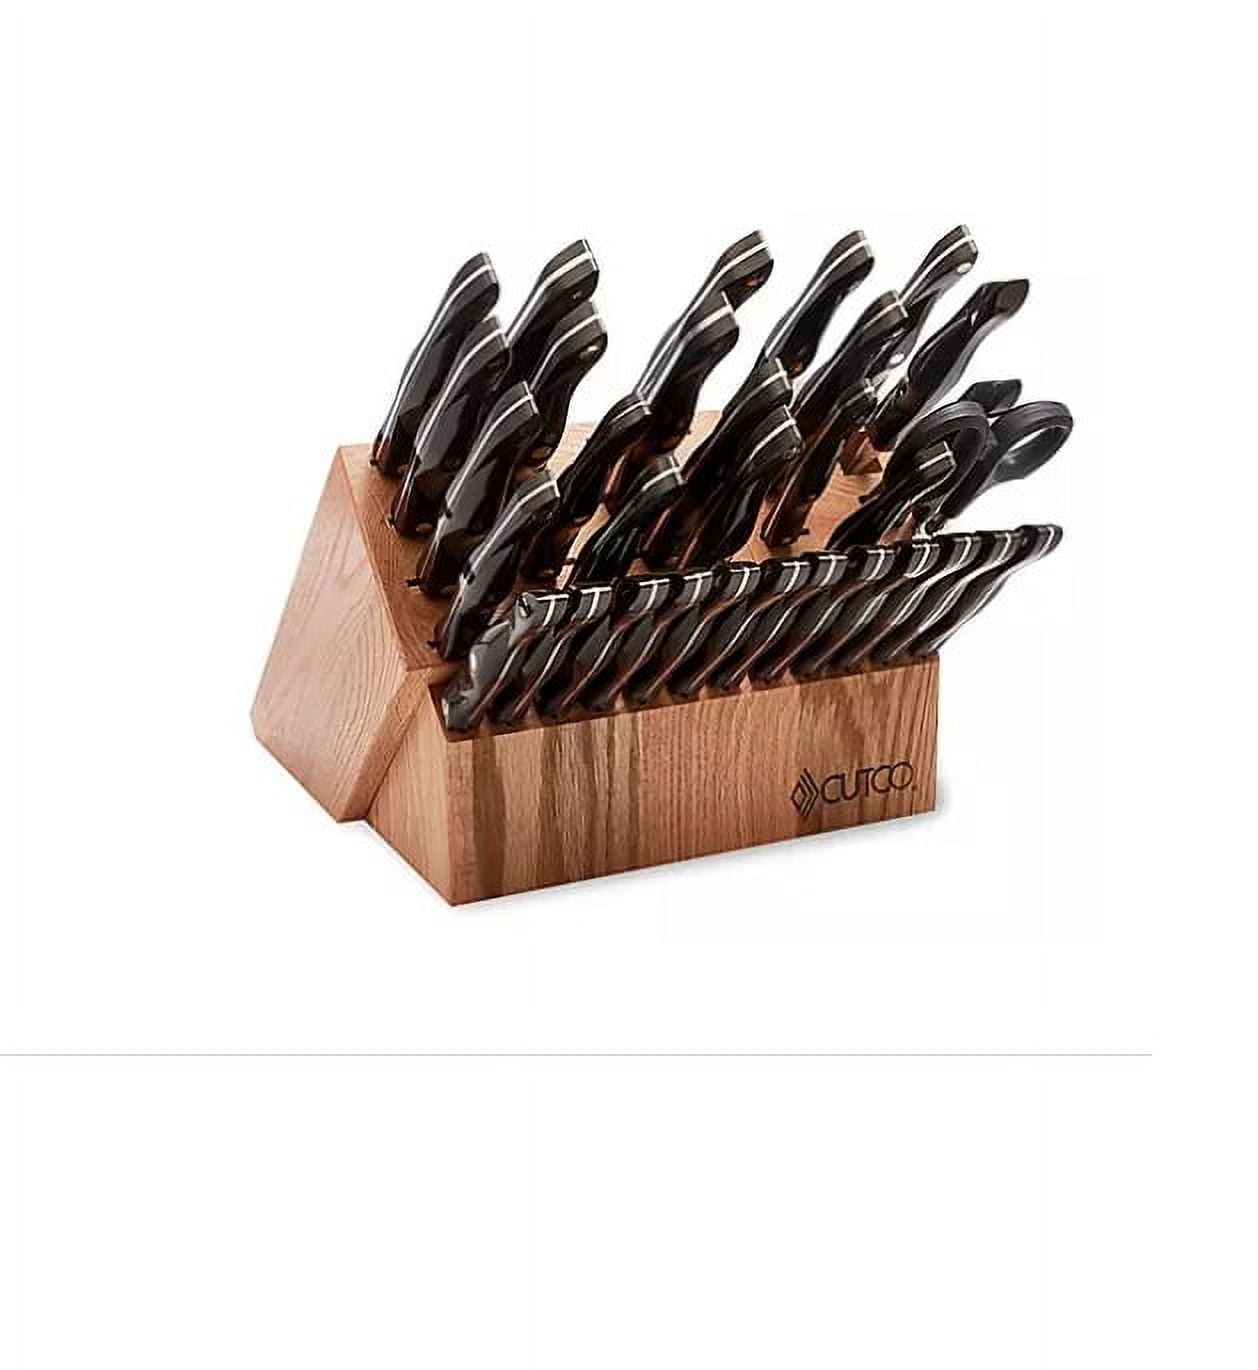 Essentials + 5 Set with Block, 12 Pieces, Knife Block Sets by Cutco